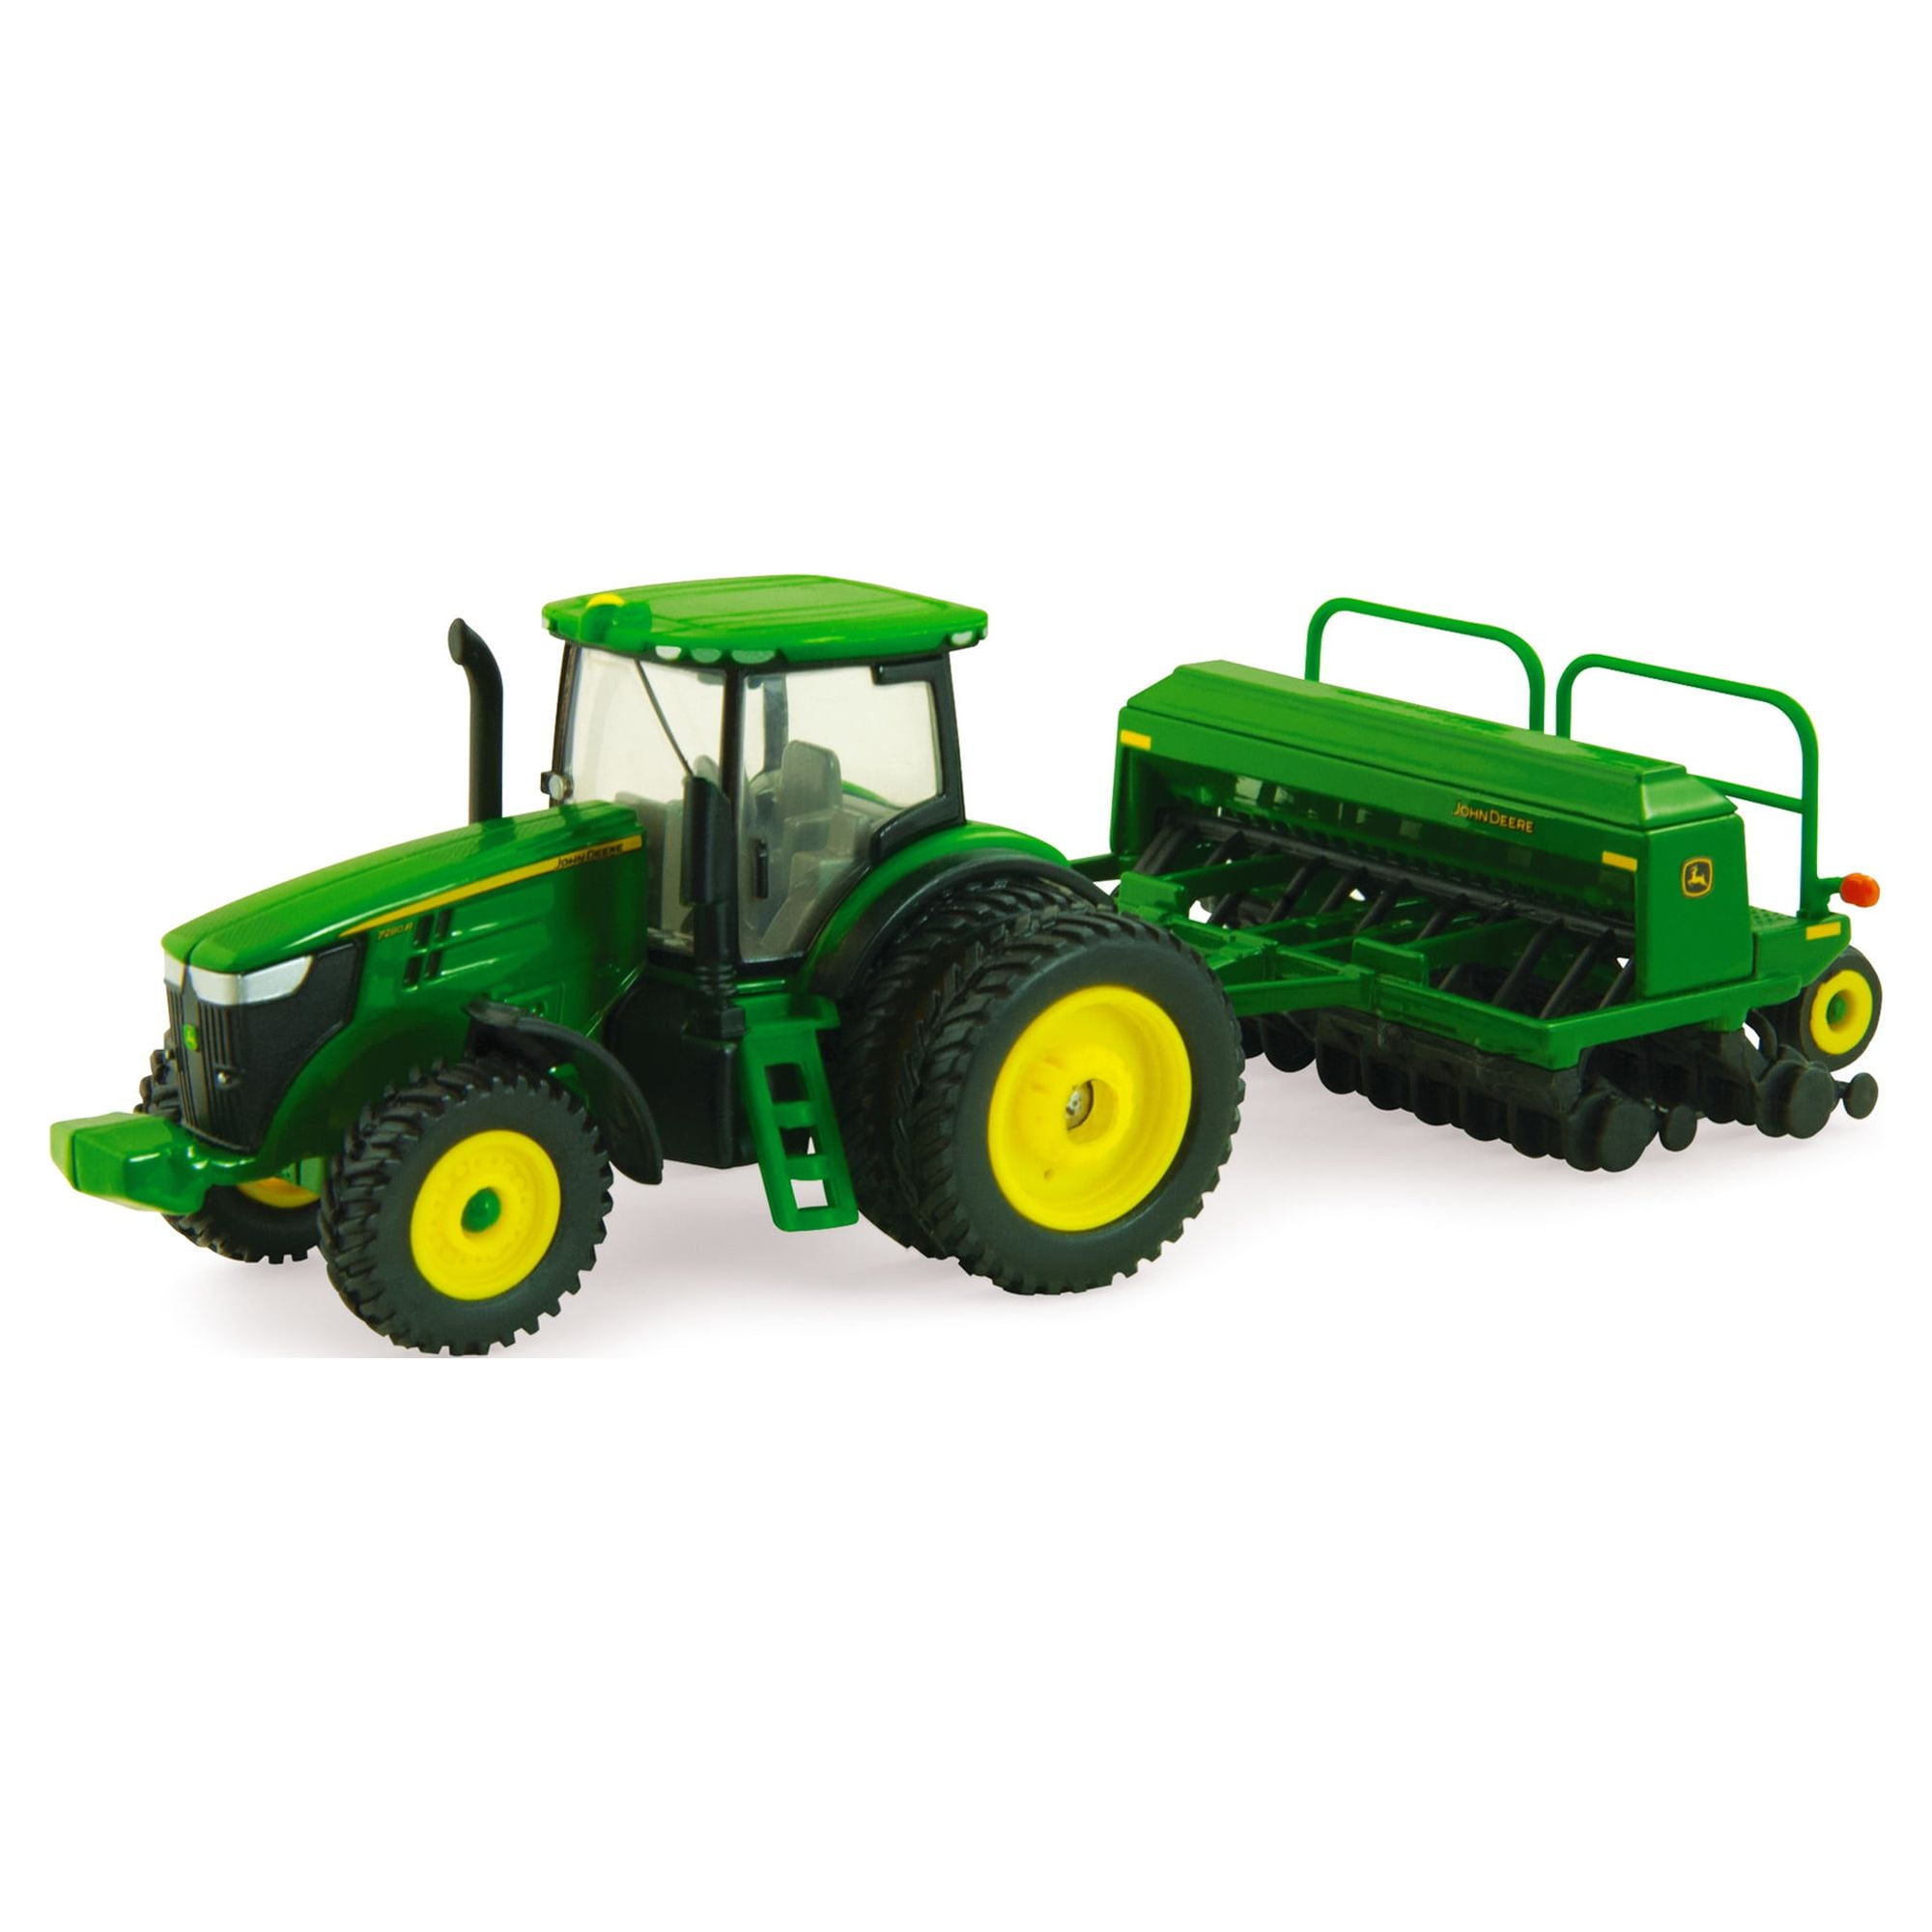 Siku Tractor with Front End Loader - 1:64 Scale - New in Package